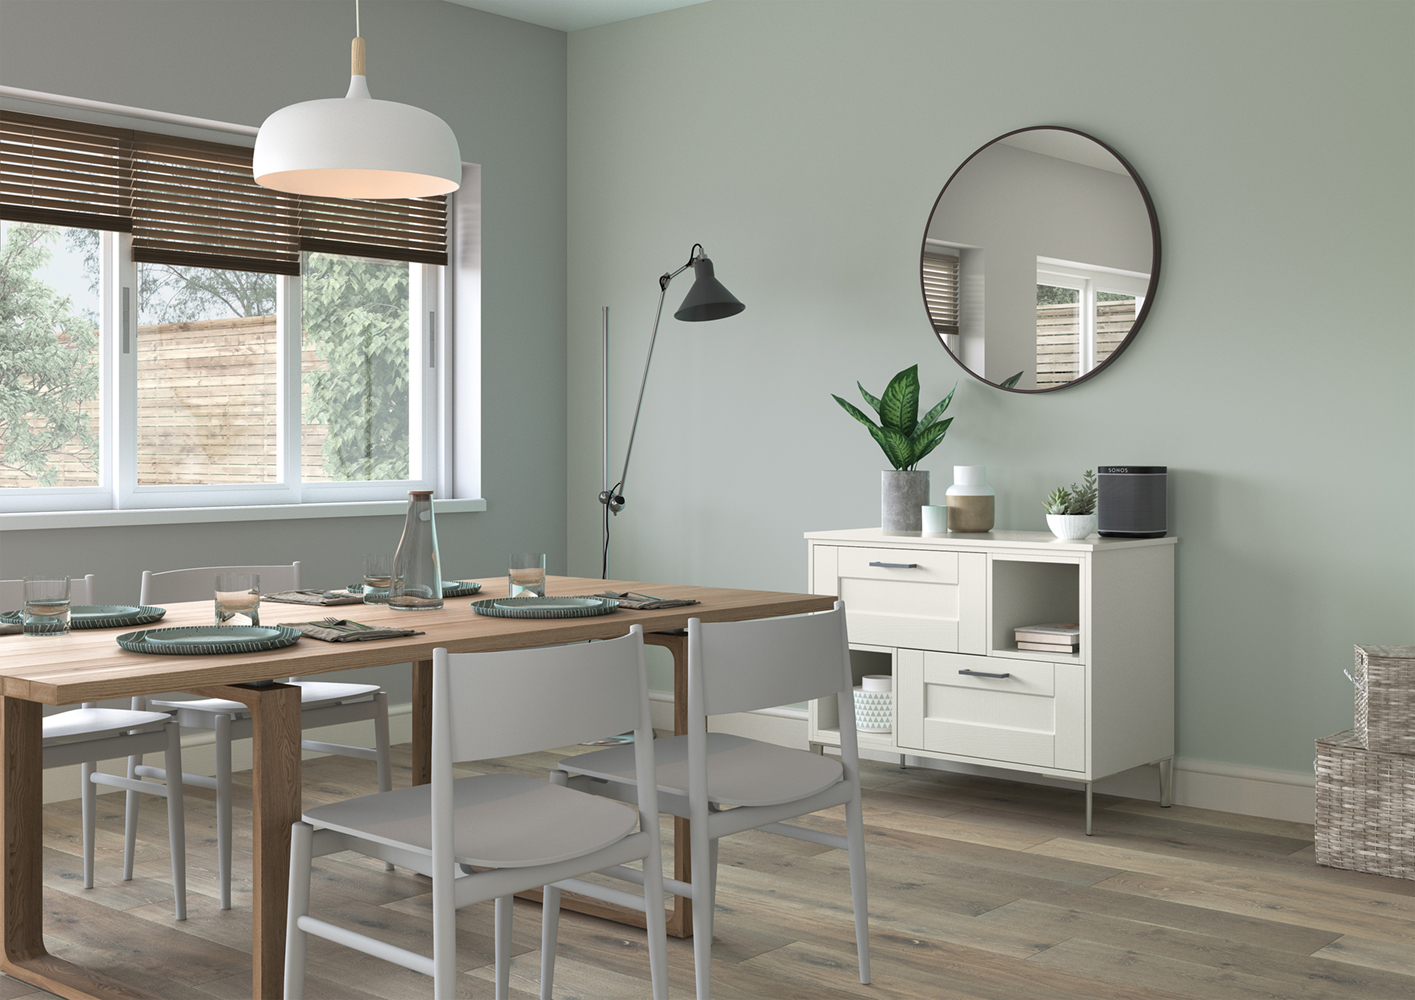 Kendal Porcelain shaker living unit and wooden kitchen table, made by The Kitchen Depot